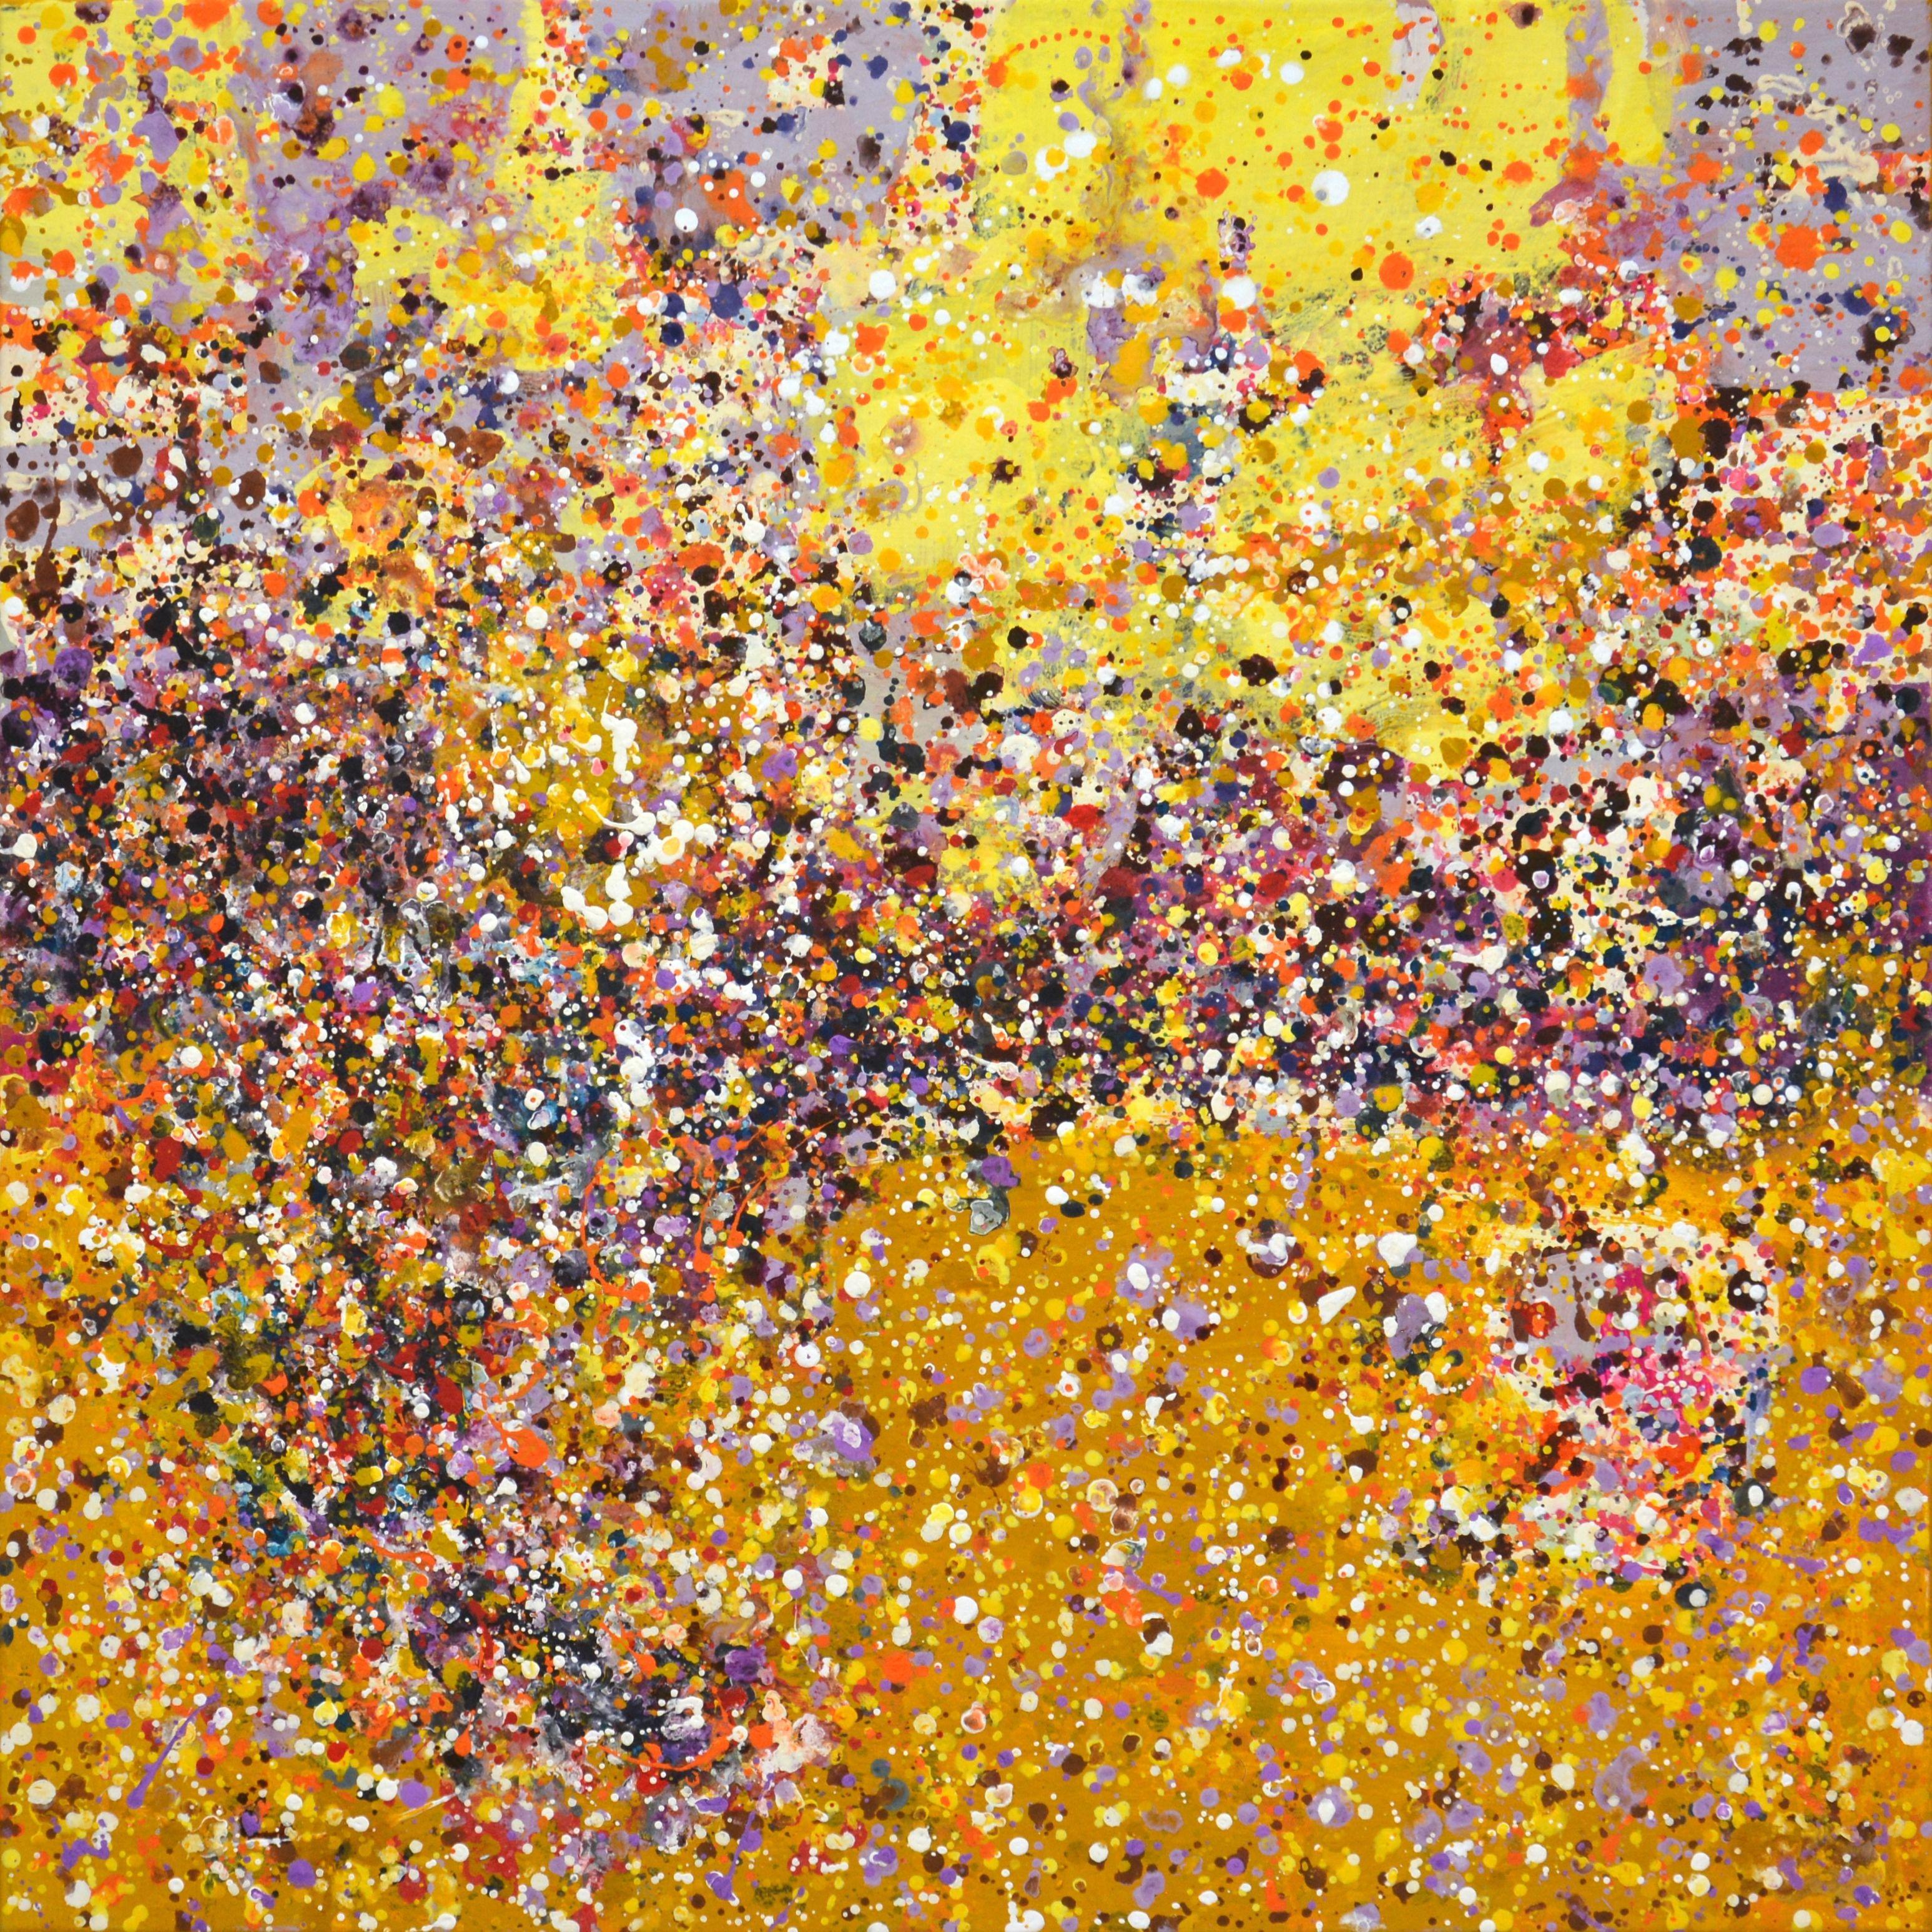 Metamorphoses 2. An expressive, modern abstract painting created by drops and splashes of paint that sparkles and shimmers! The colors are superimposed on each other and also correspond to different points. Many colored drops, yellow, orange, red,